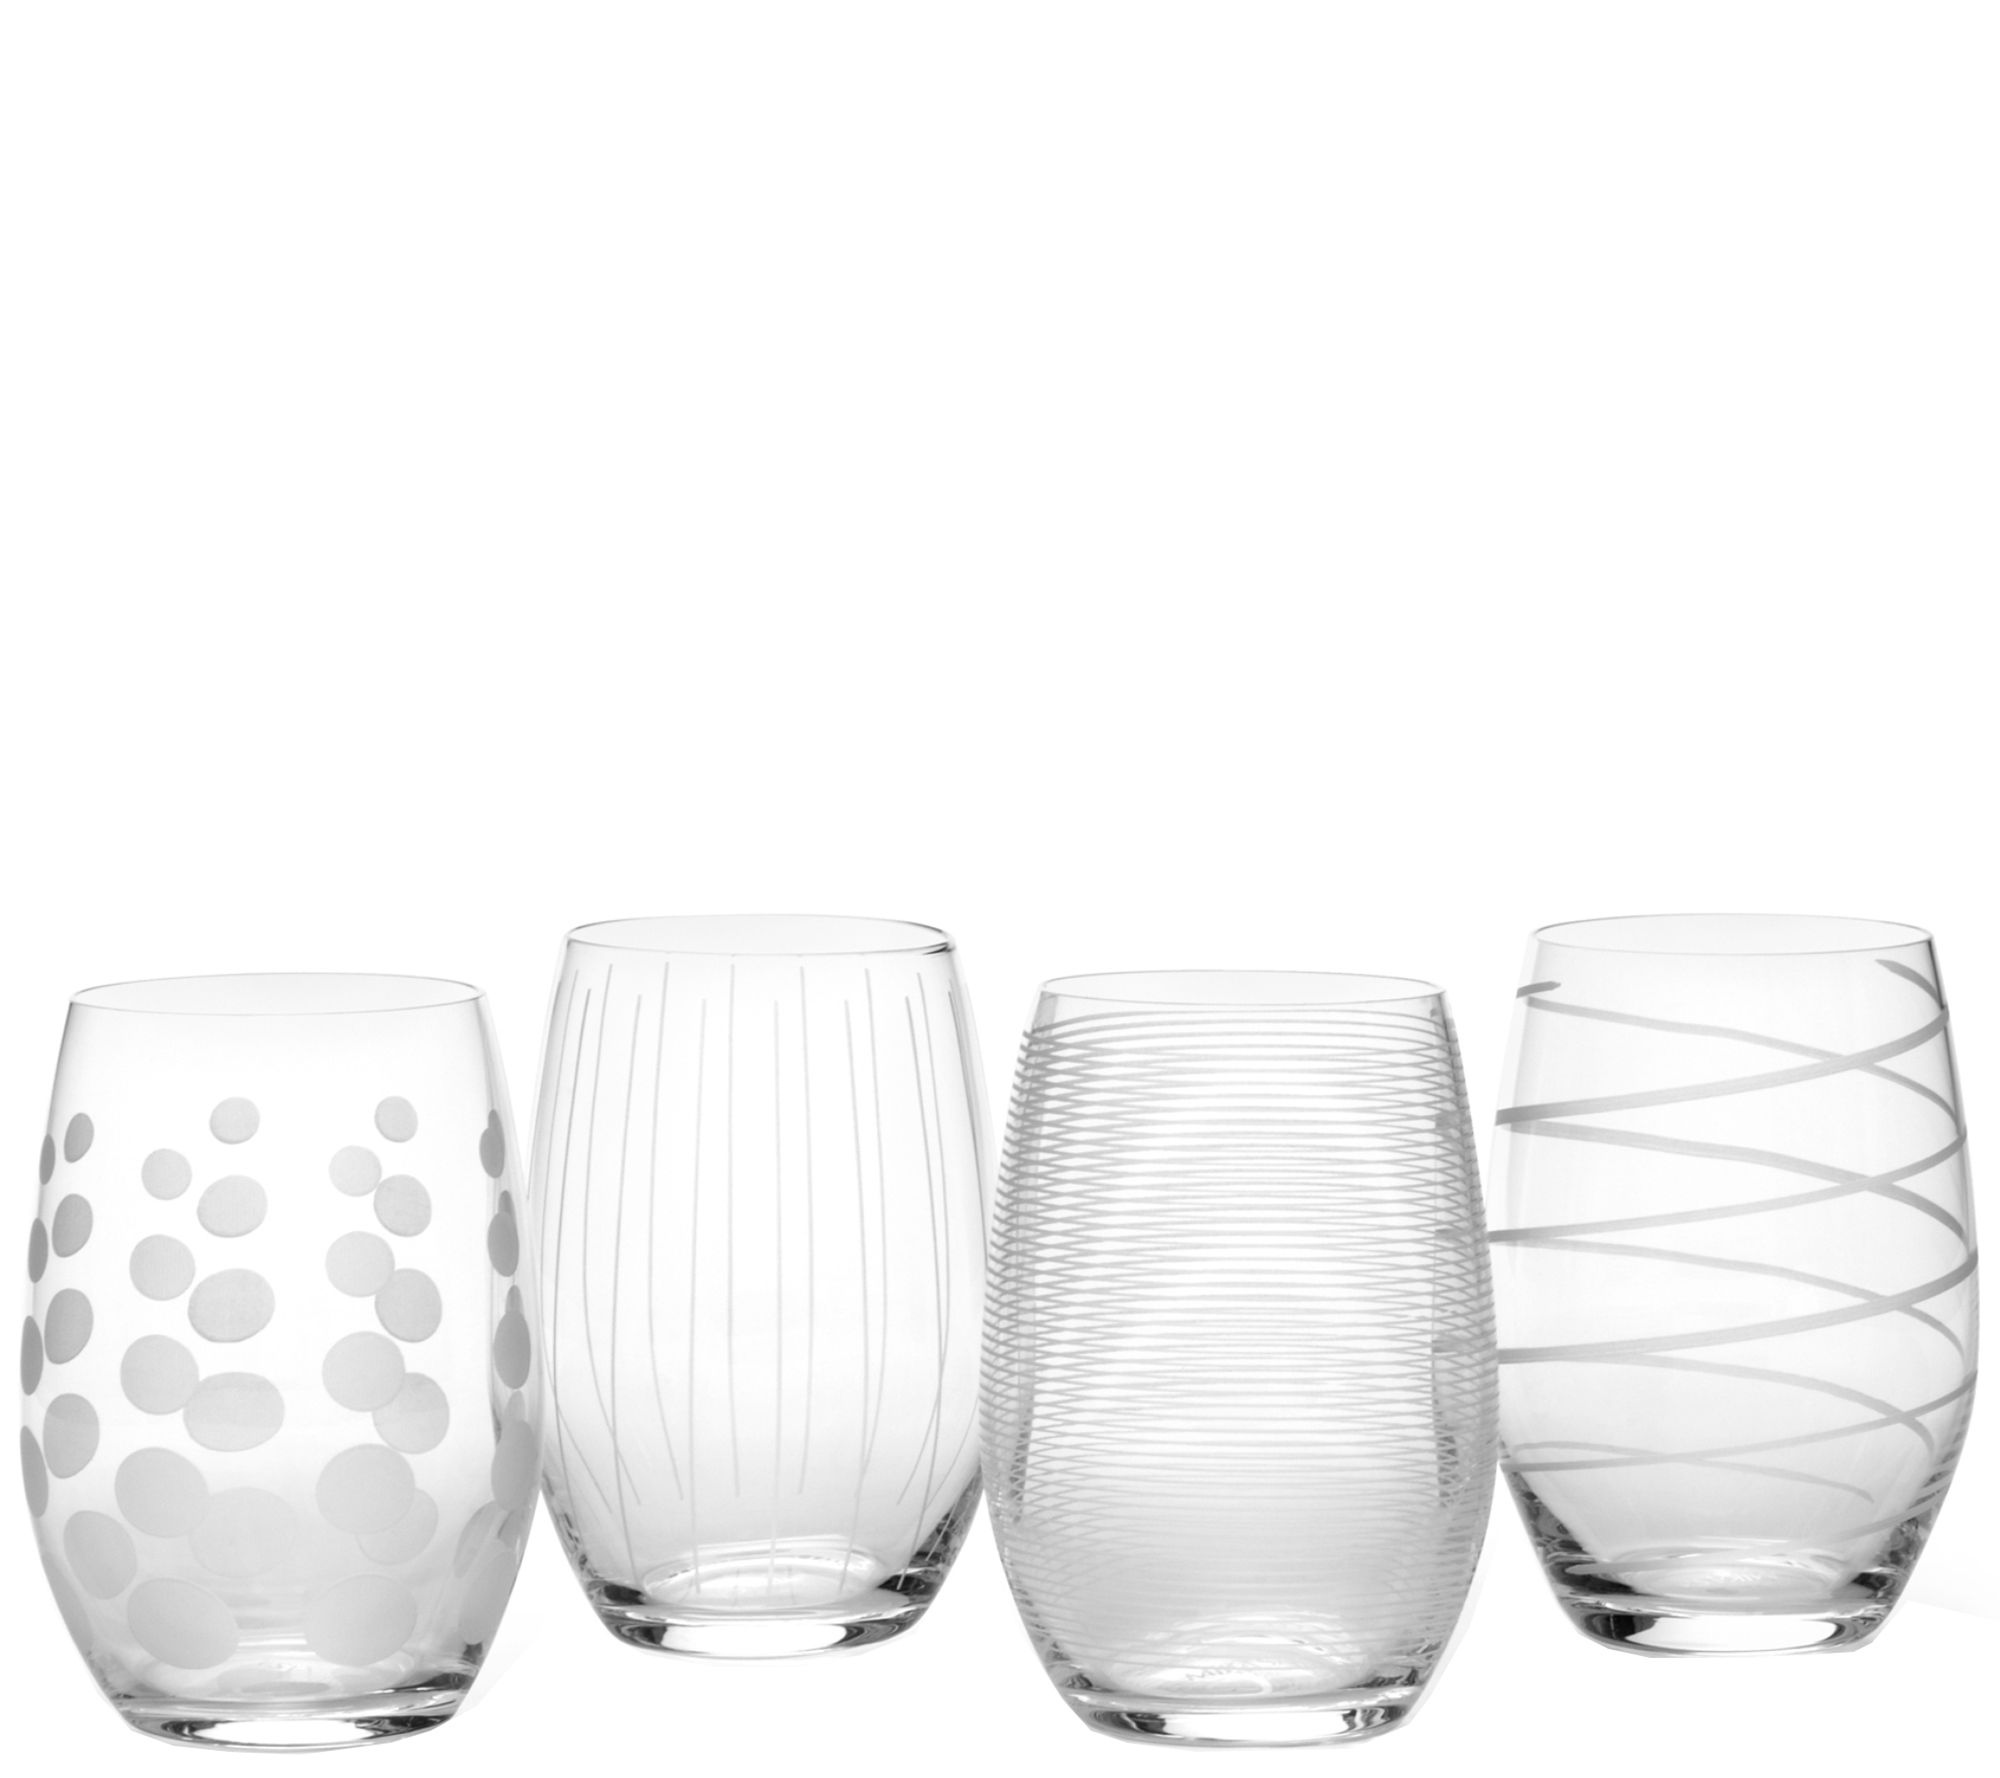 Mikasa Cora 14 oz. Stemless Wine/Double Old-Fashioned Glasses, Set of 4